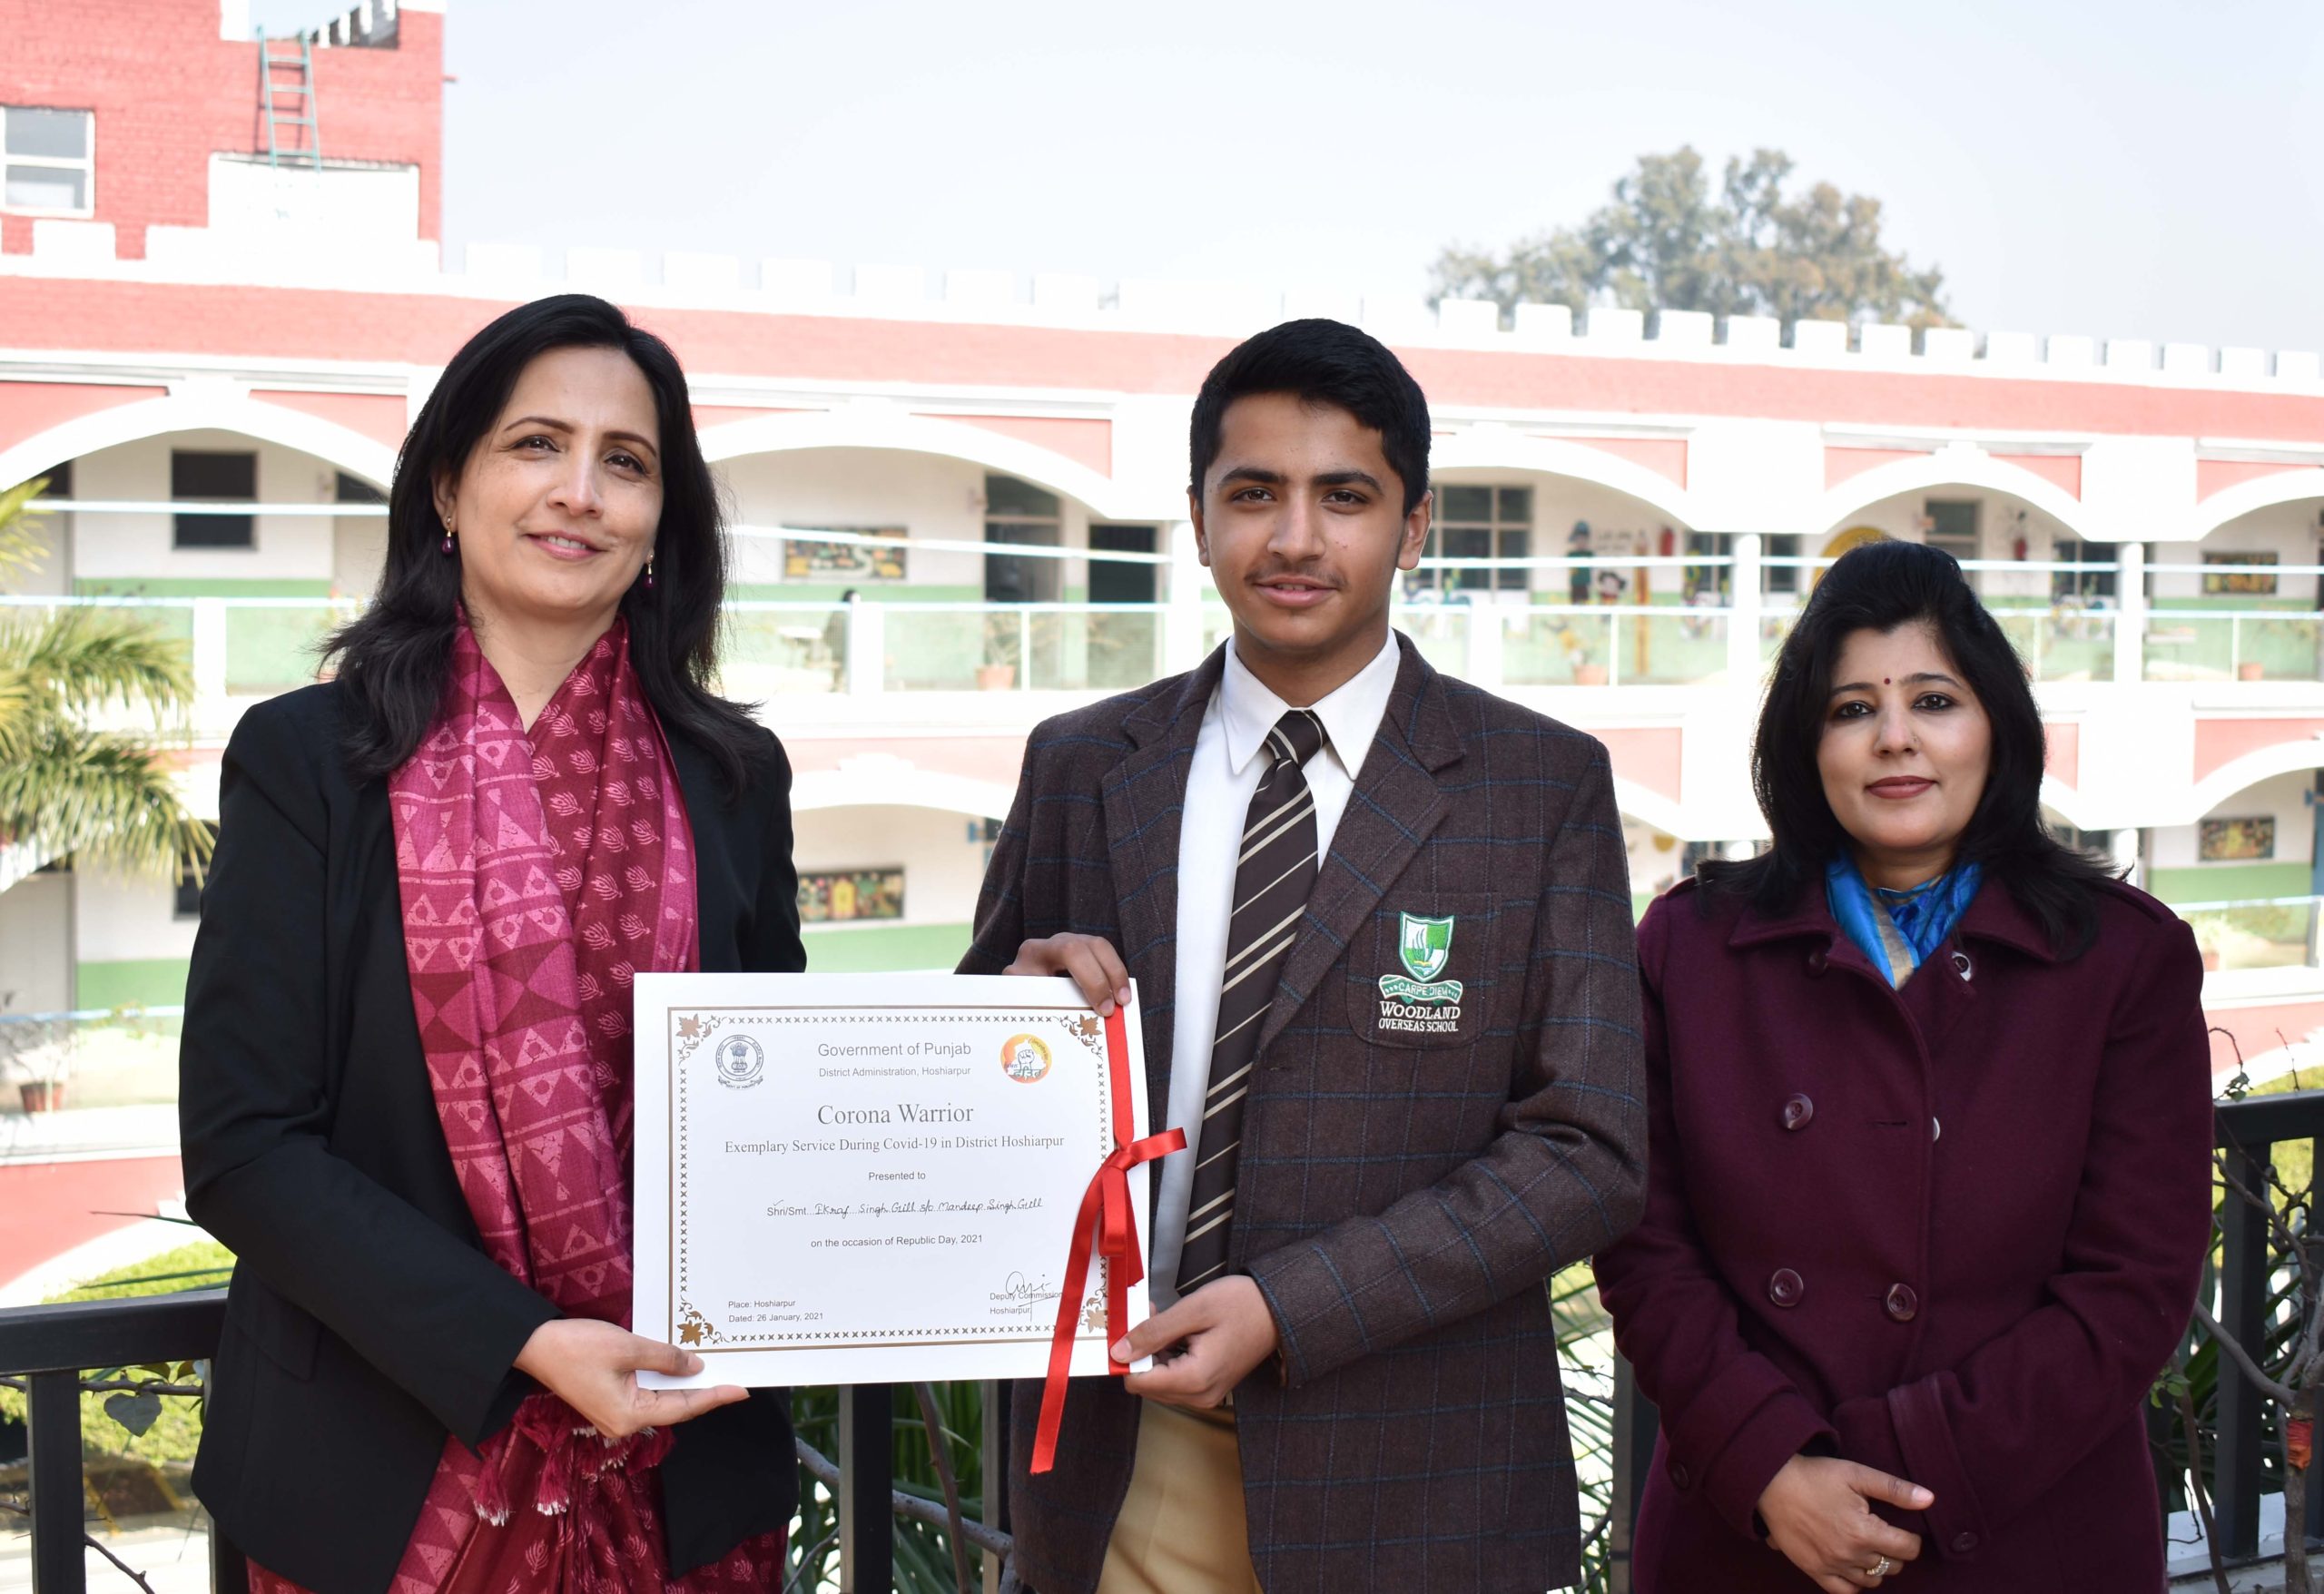 District Administration (Hoshiarpur) Applauds Zealous Ekraj Singh Gill at 72nd Republic Day Grand Ceremony as Corona Warrior for his Exemplary Social Work